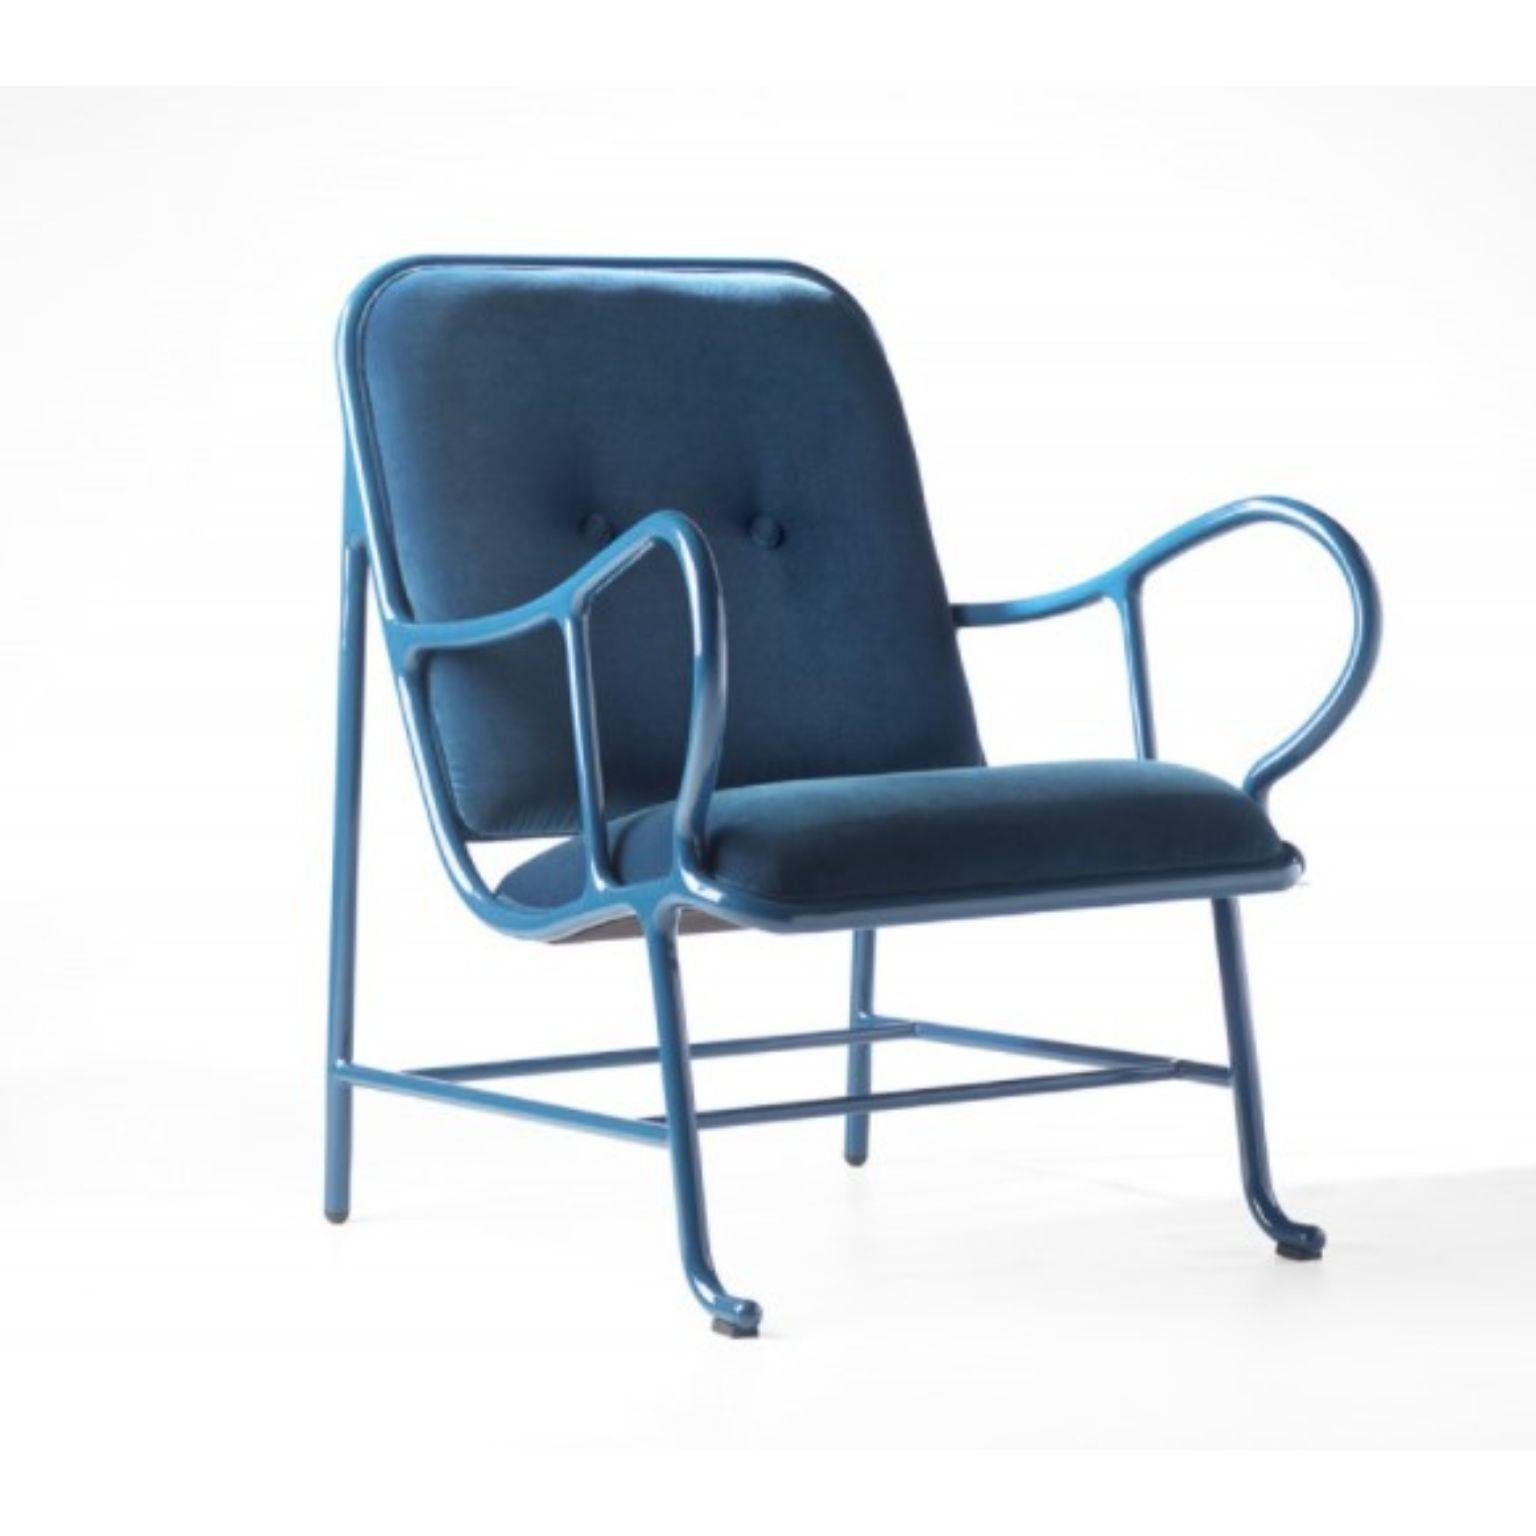 Indoor gardenia blue armchair by Jaime Hayon
Dimensions: D 89 x W 70 x H 100 cm 
Materials: structure in aluminum and laminates in extruded aluminum. Powder coating in white (RAL 9001), grey (RAL 7015), or green (RAL 6021). Detachable upholstered